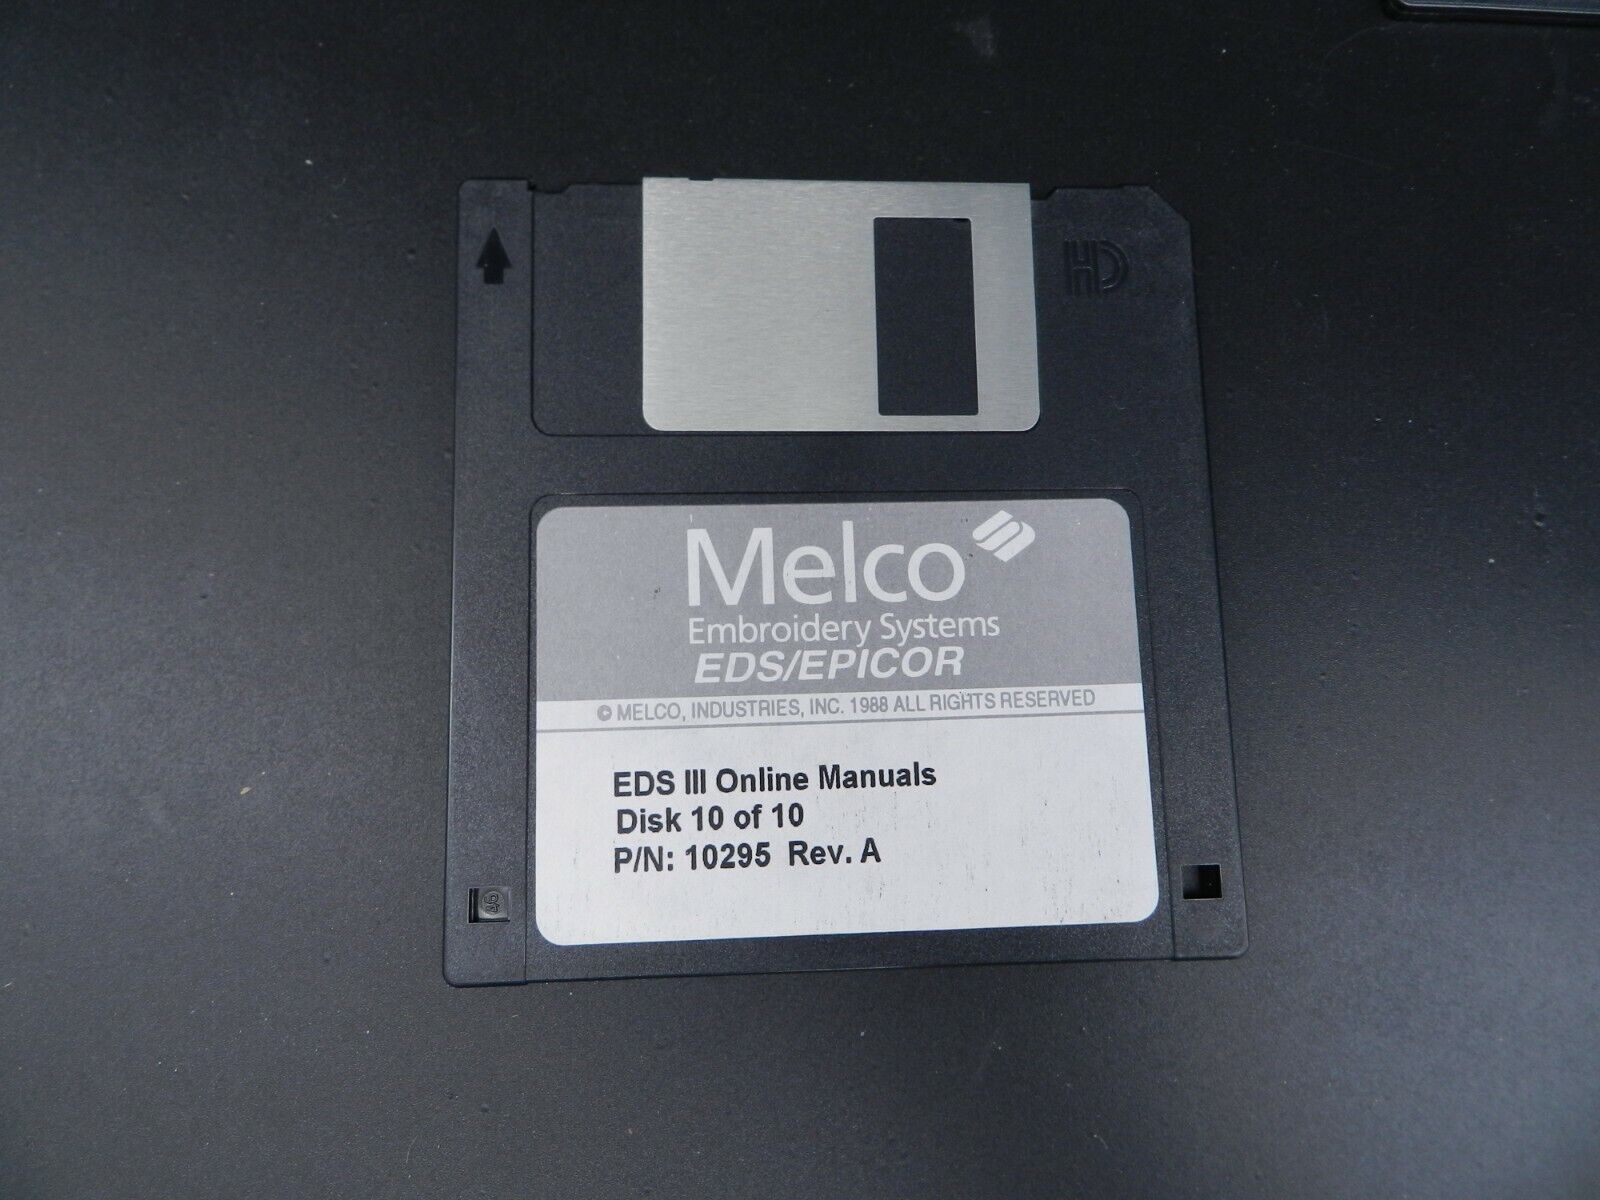 #66 Melco Eds / Epicor Software Eds Iii Online Manuals 10 Of 10 Floppy Disk